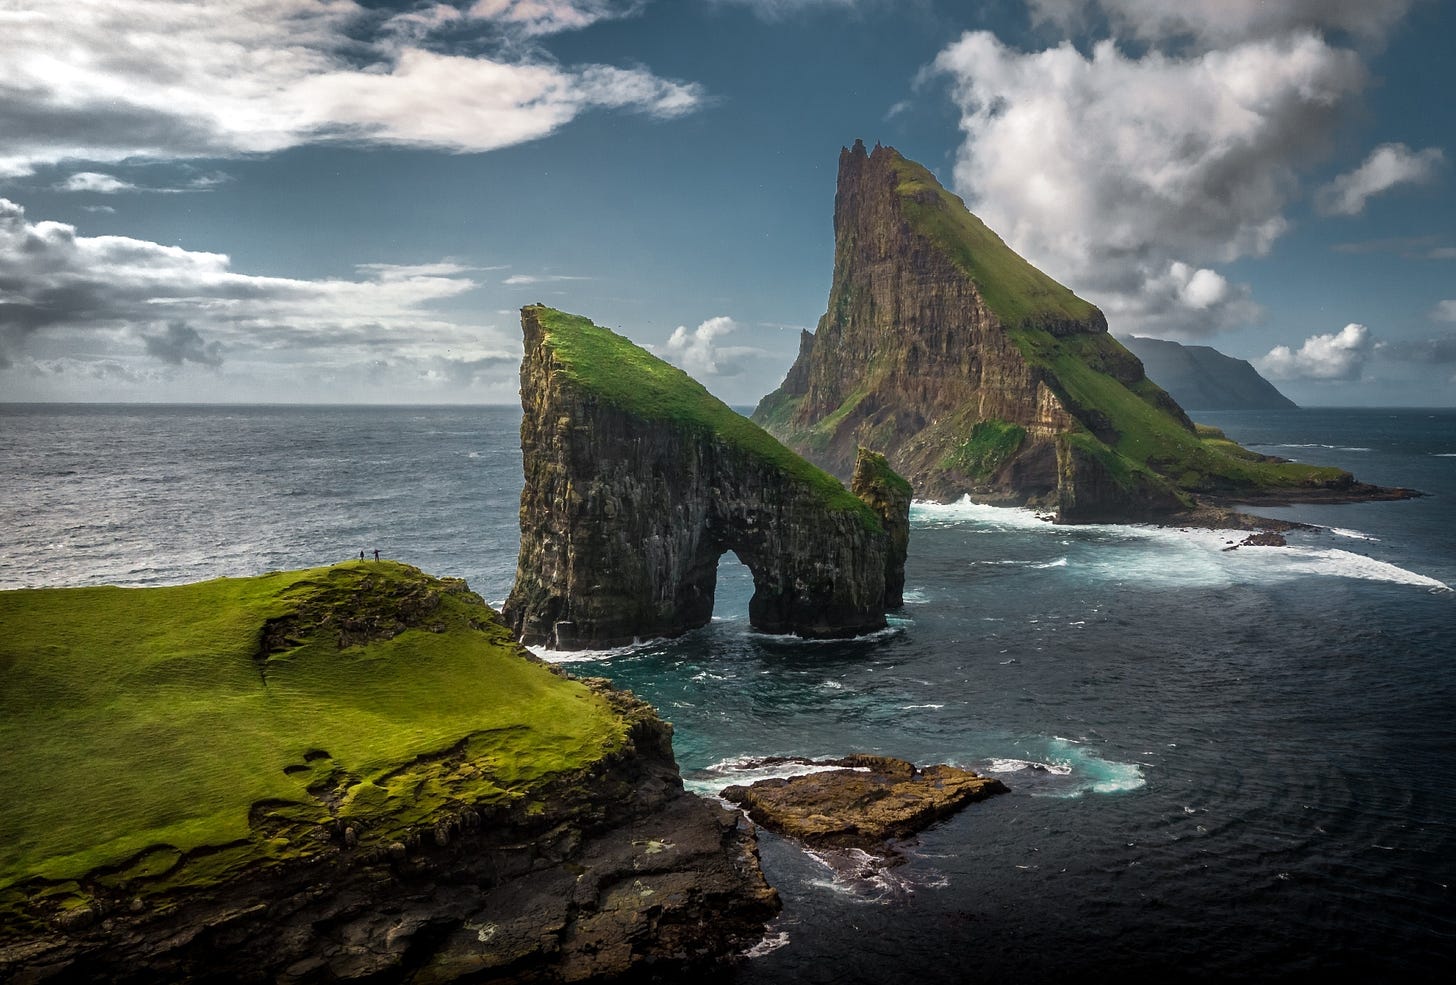 Amazing Photos of the Faroe Islands' Stunning Landscapes From Above